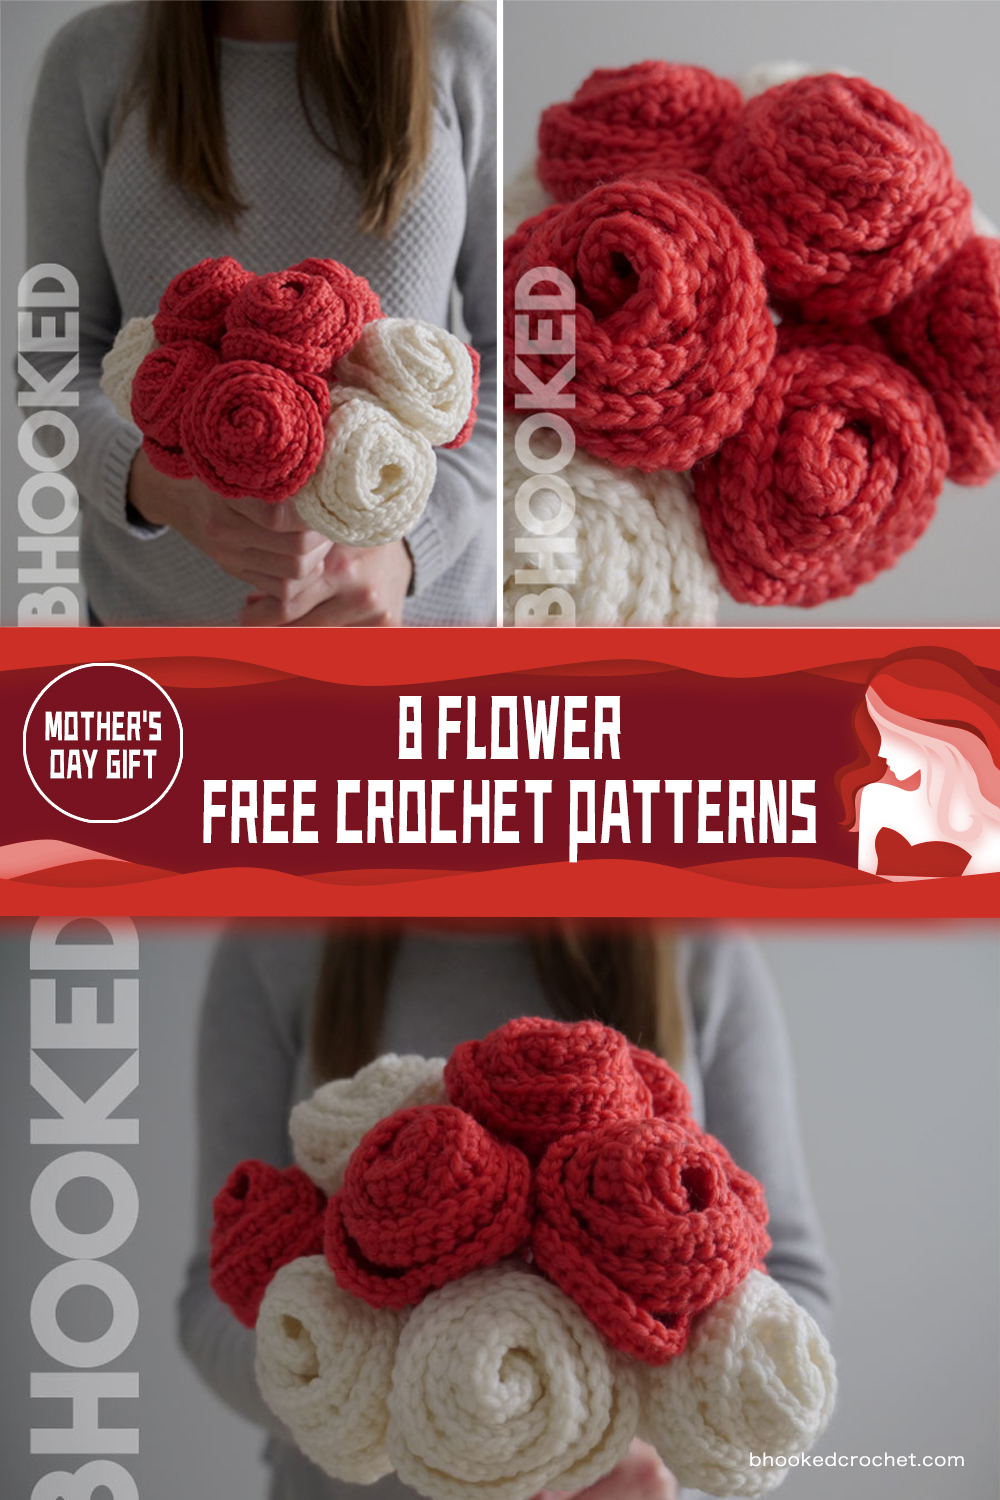 8 Flower FREE Crochet Patterns for Mother's Day Gift 